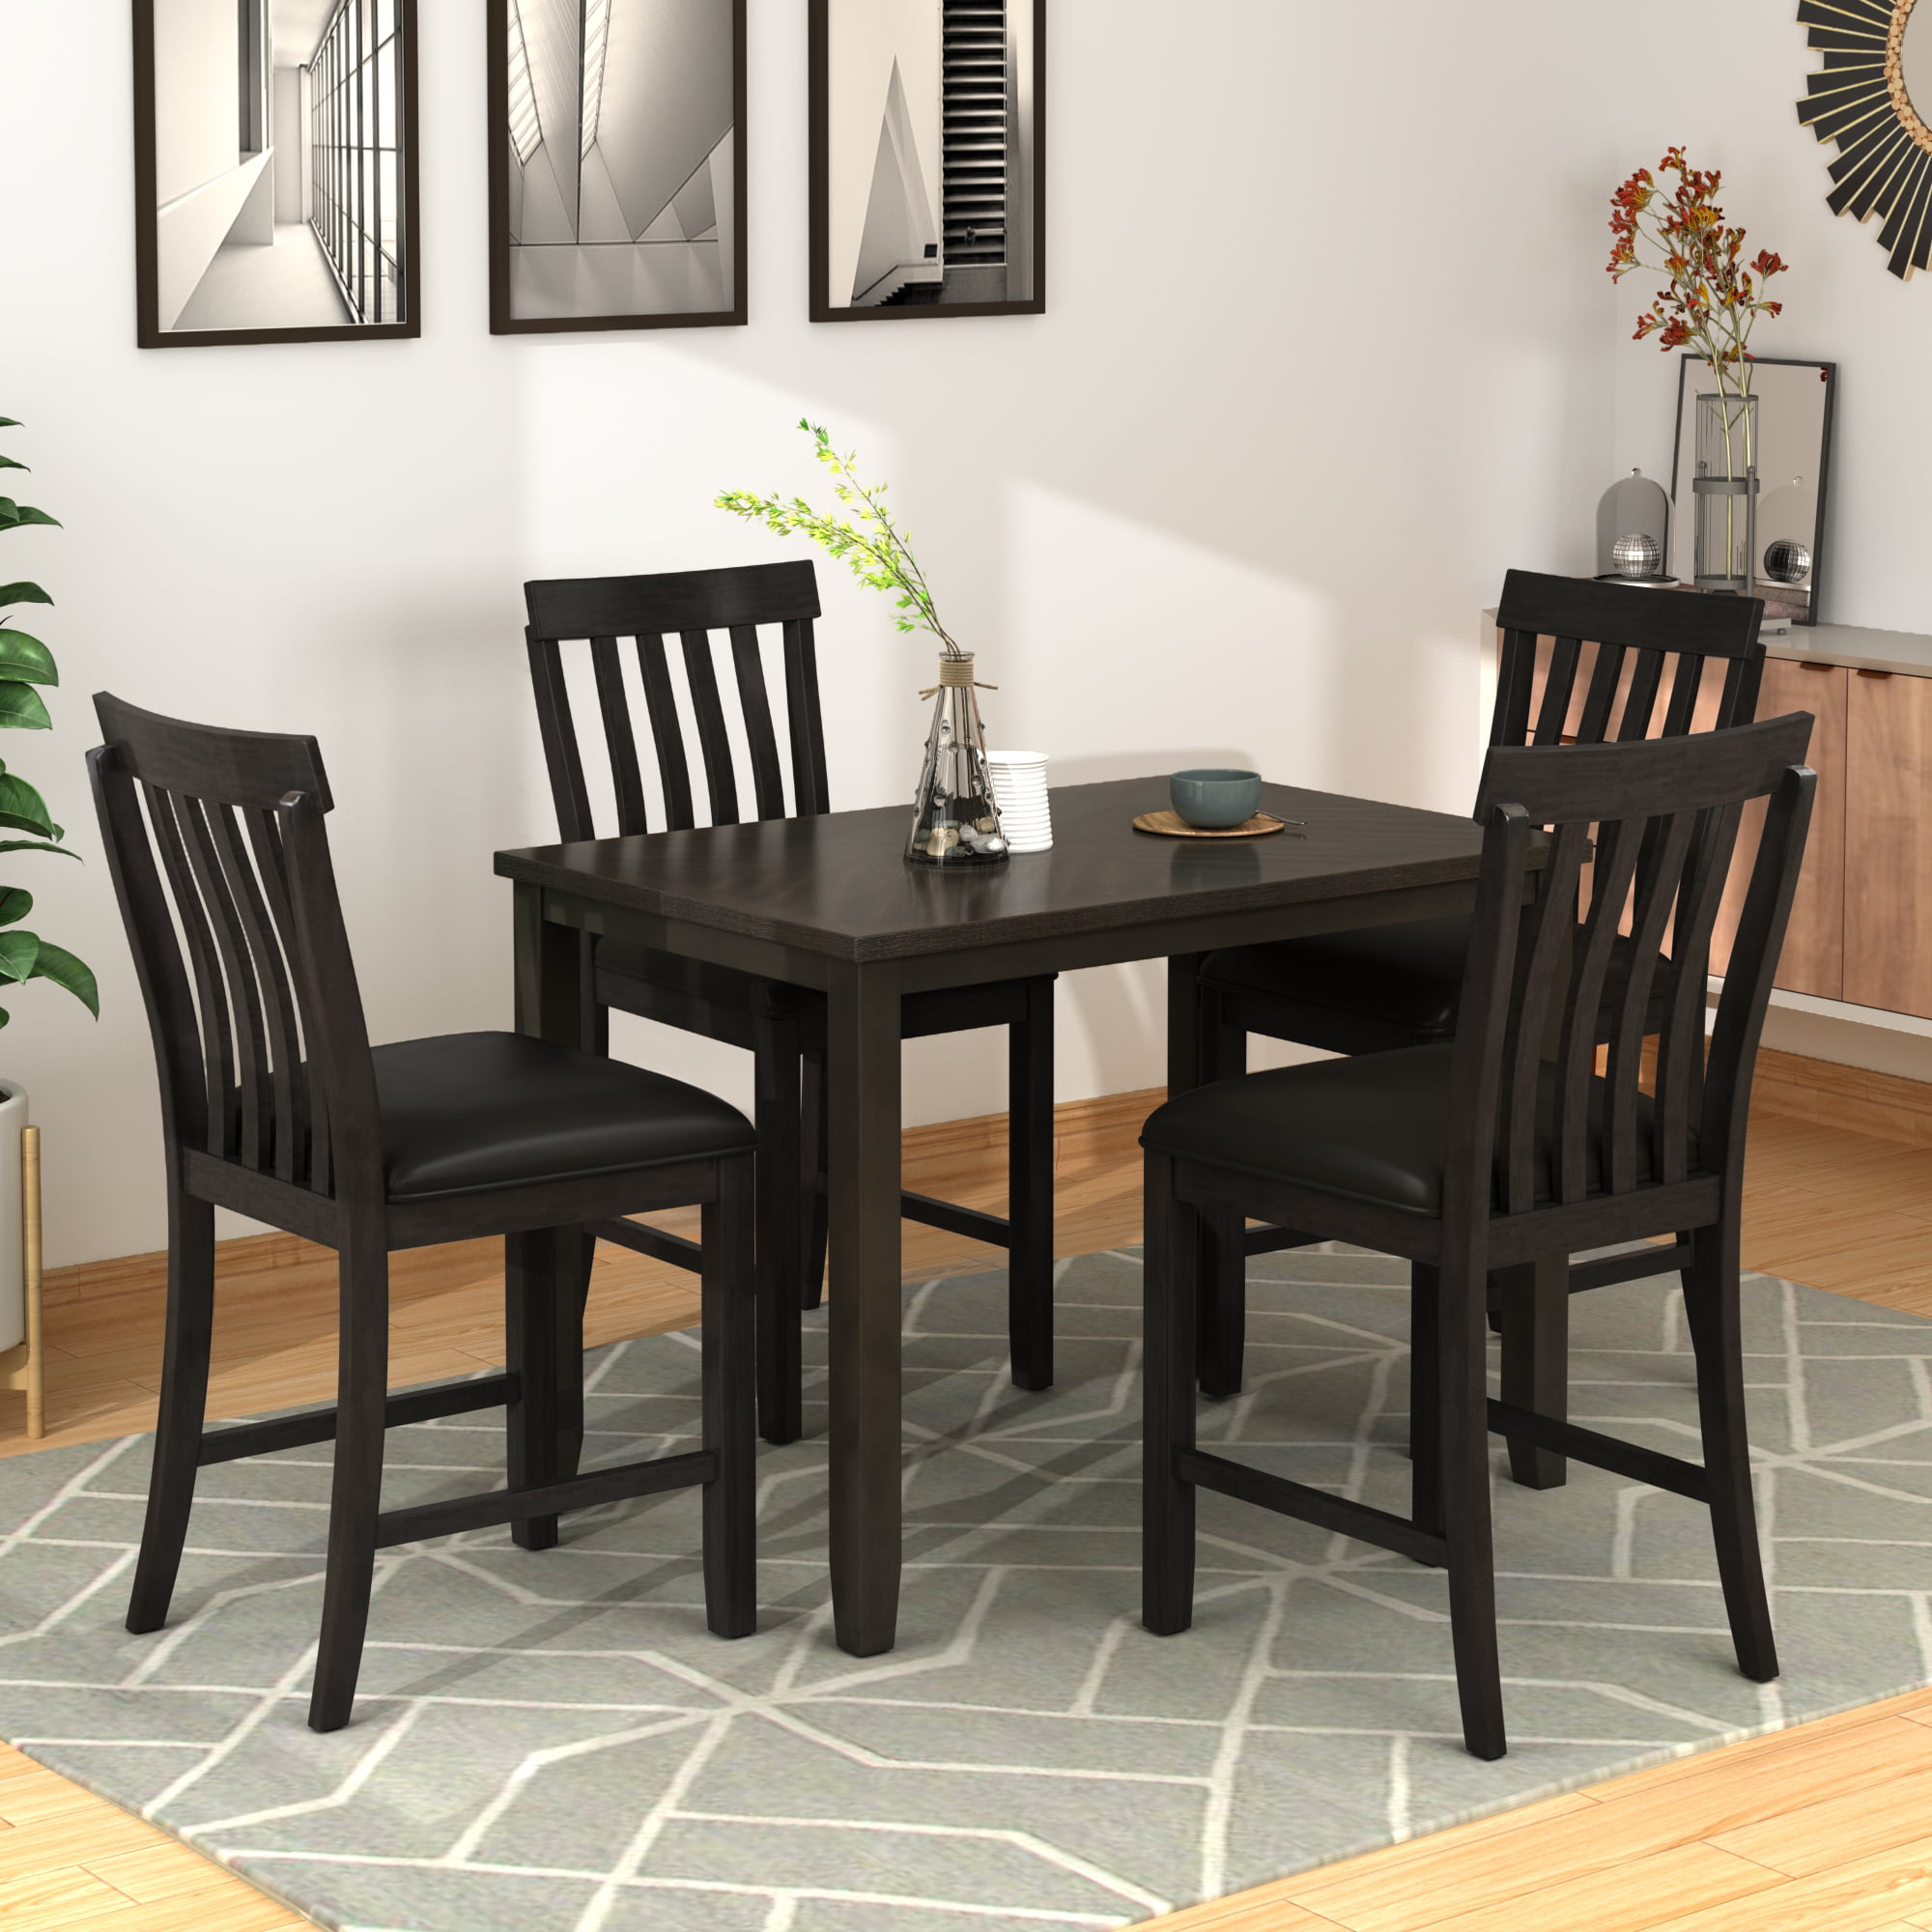 5 Piece Dining Set, Dining Room Table and High Back Chairs for 4 People